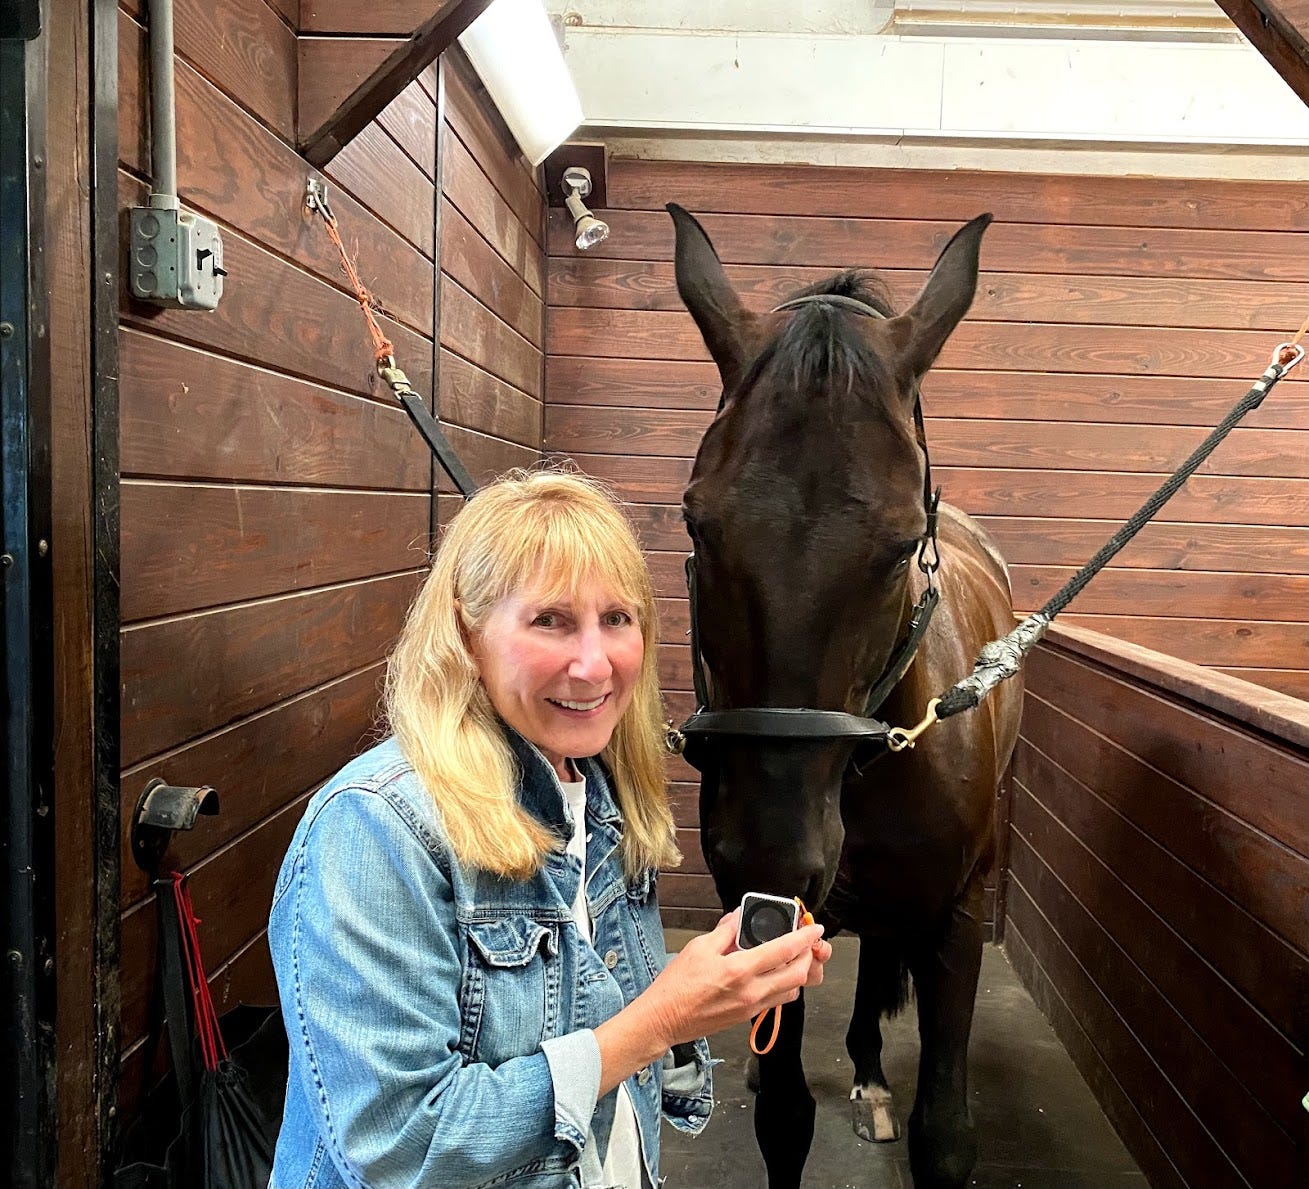 Janet Marlow, who has blonde hair and a denim jacket on, smiling next to a horse in a stable.